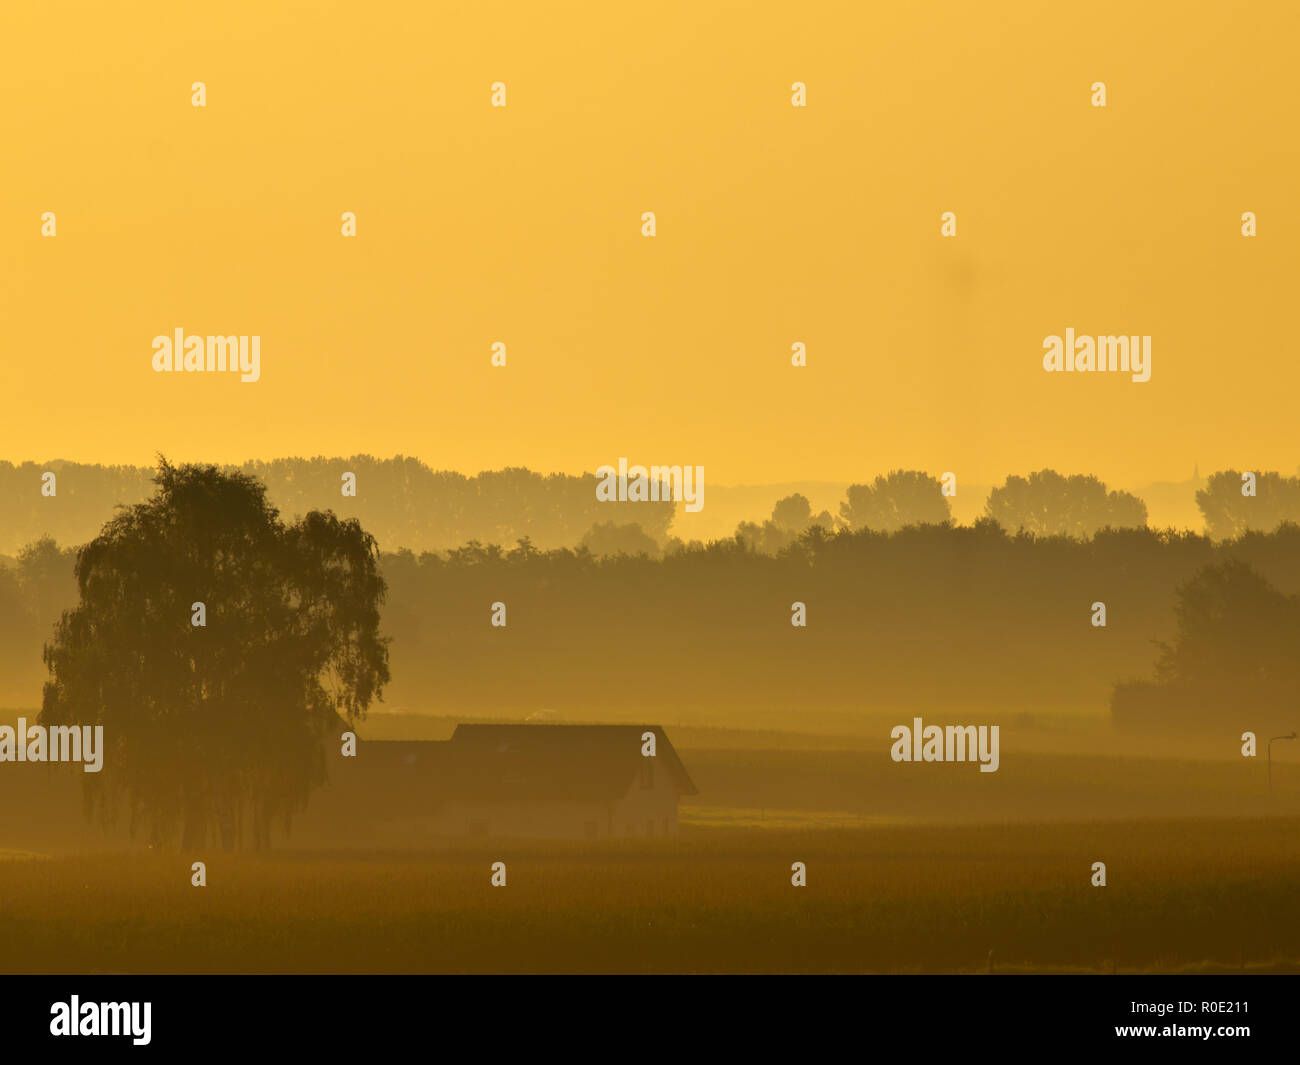 lonely house during misty sunrise in agricultural landscape Stock Photo